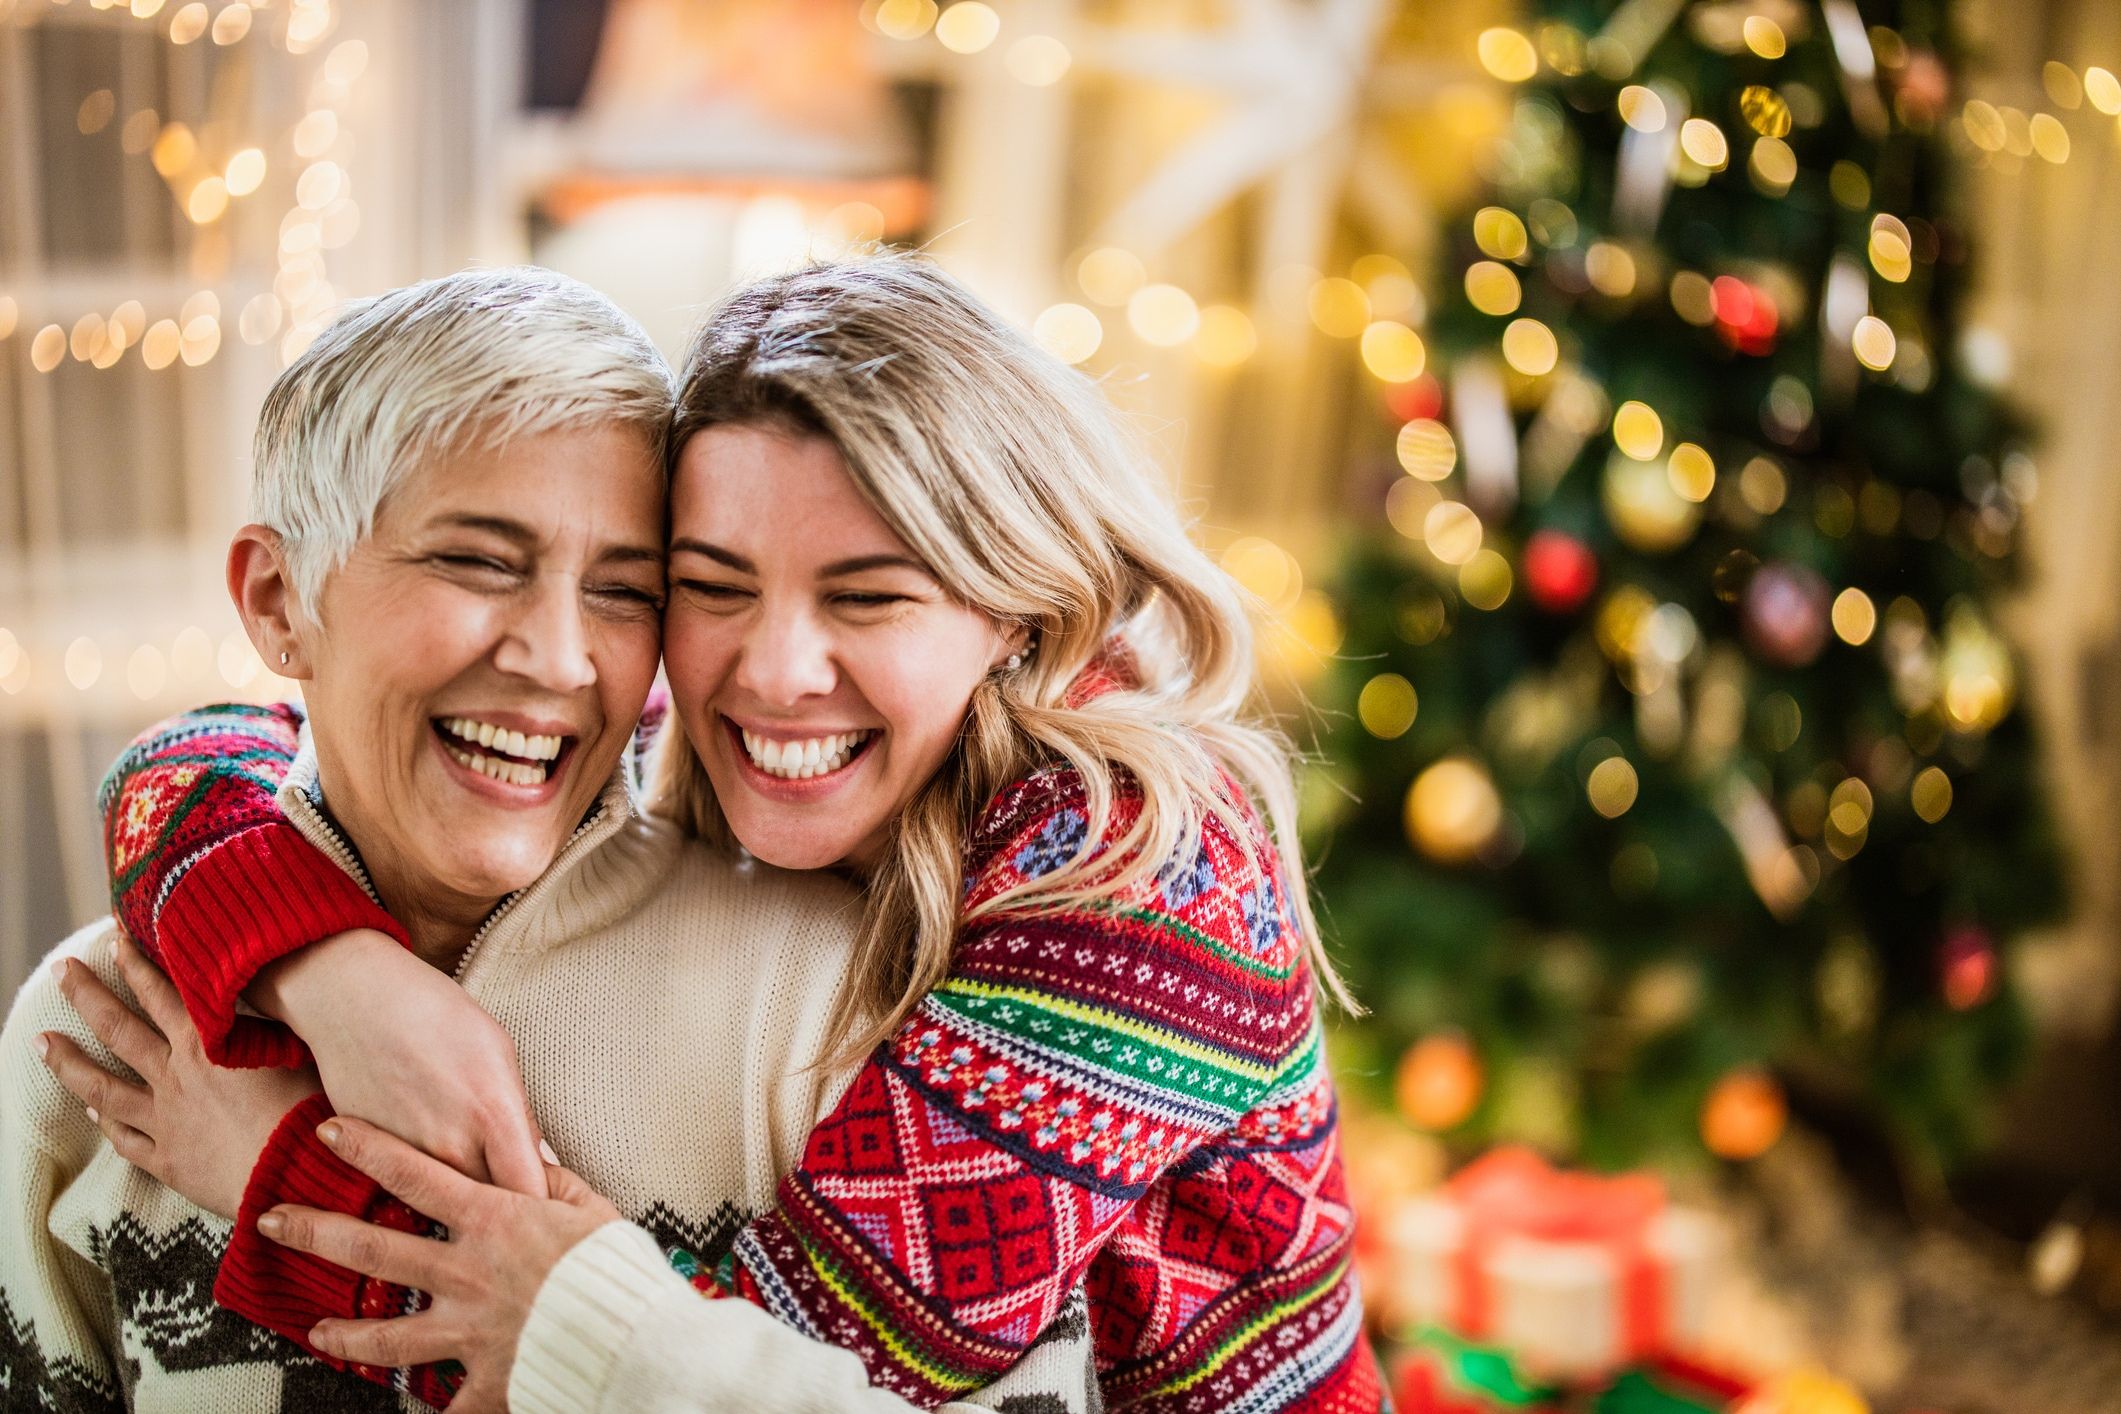 Home for the holidays: Tips for evaluating your parents’ well-being